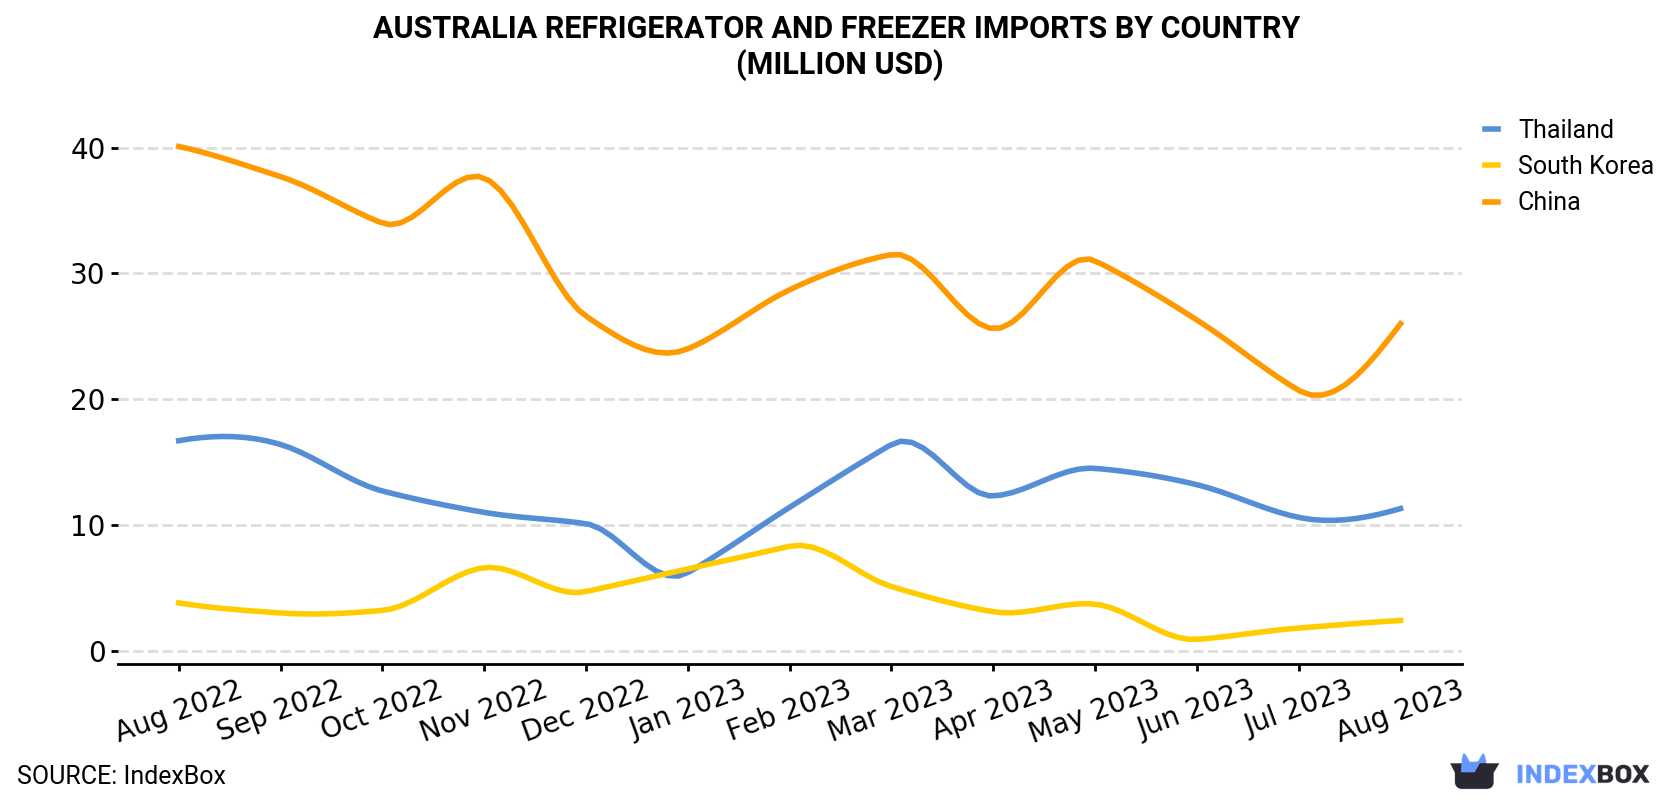 Australia Refrigerator and Freezer Imports By Country (Million USD)